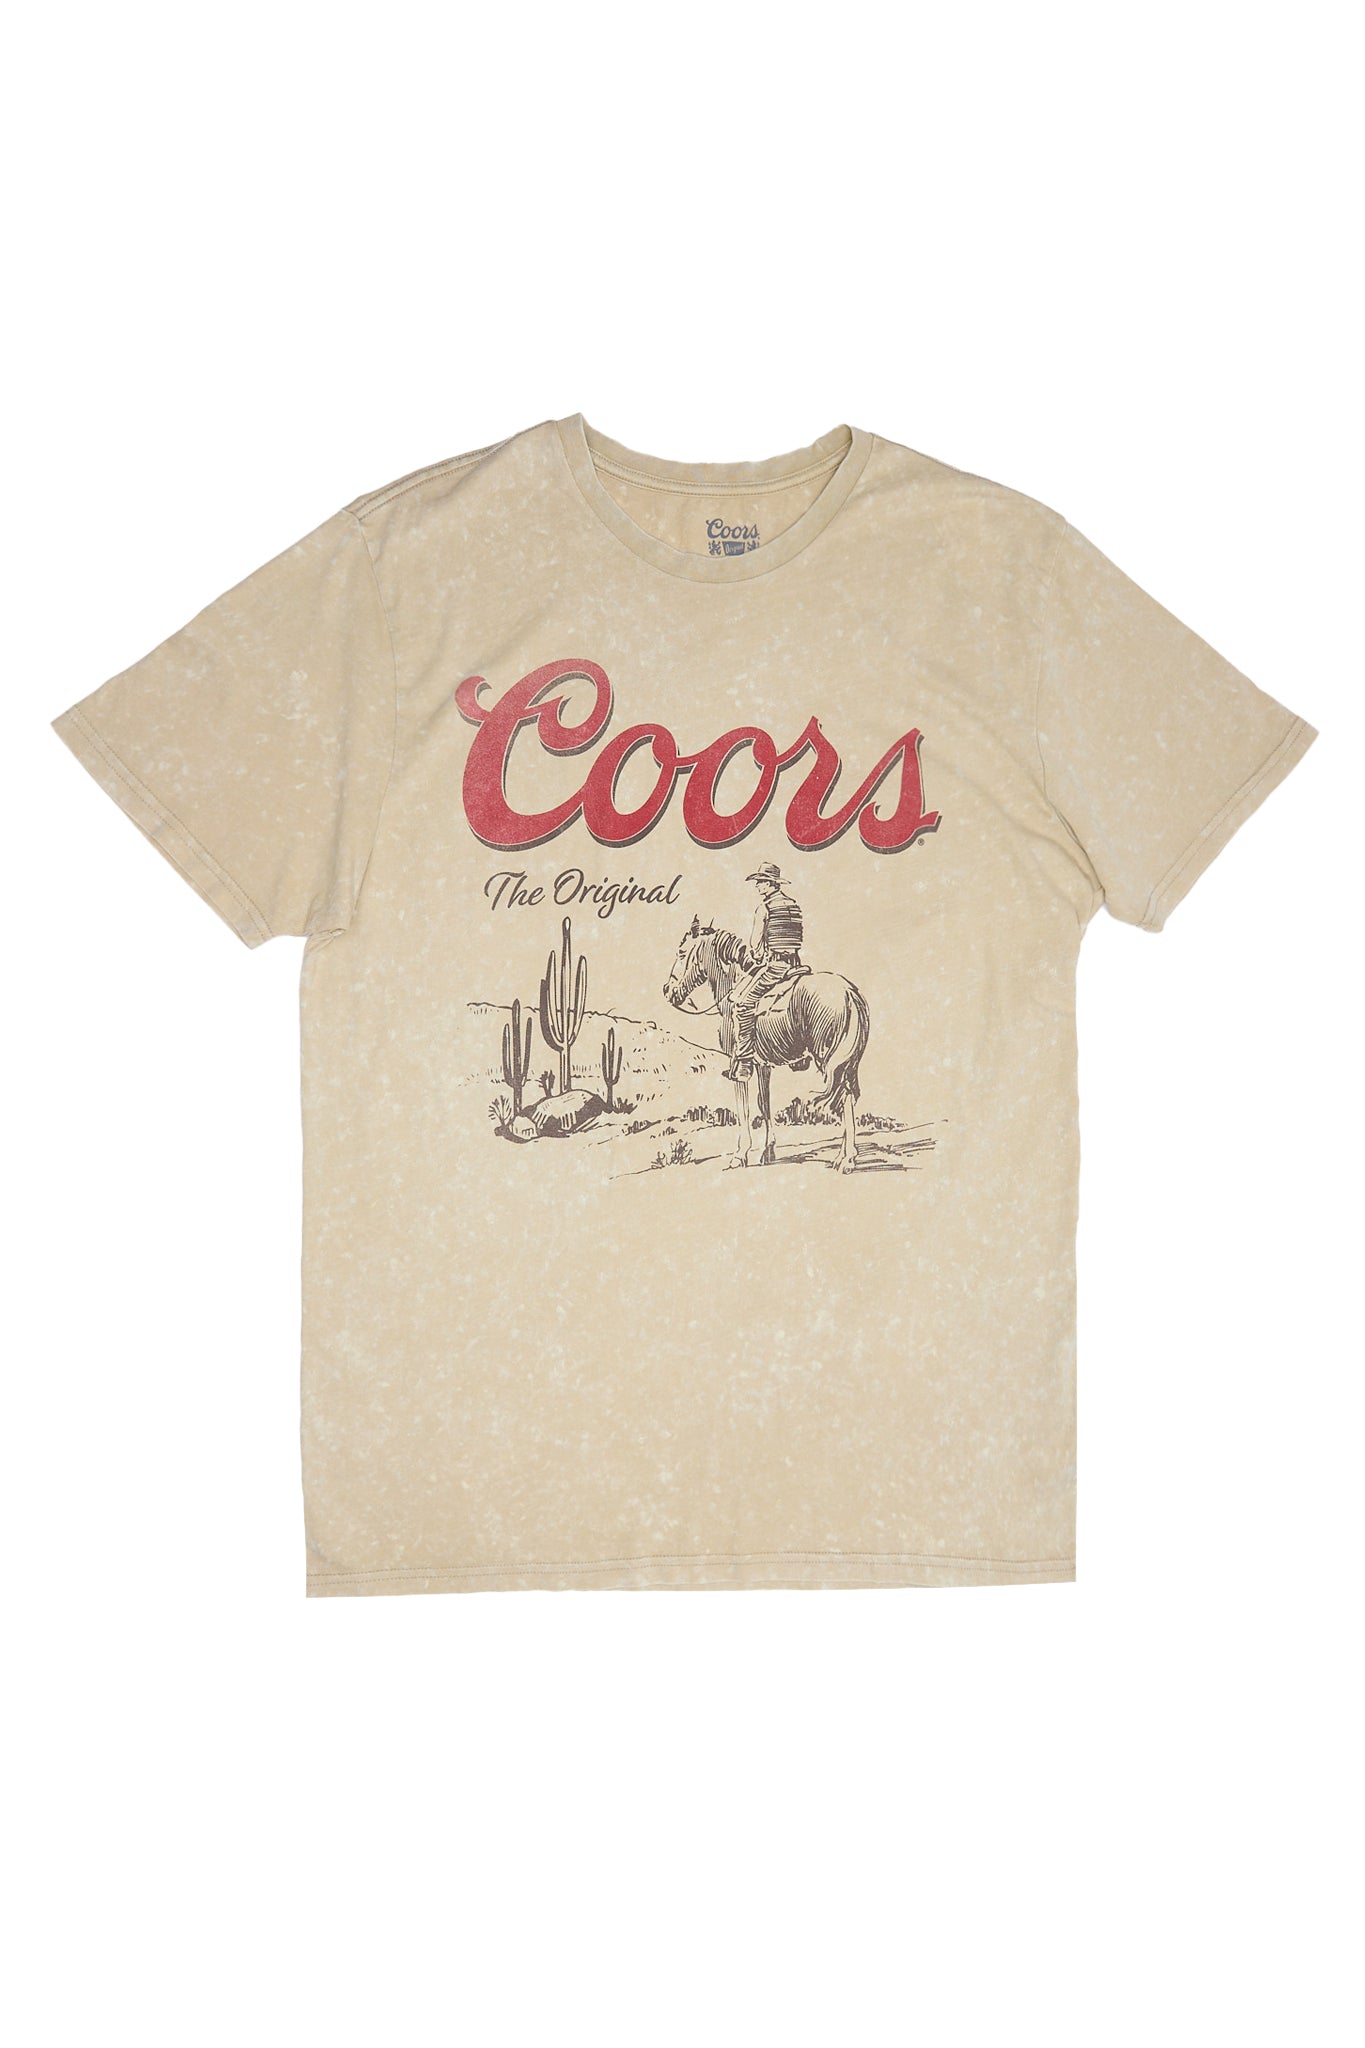 Coors Rodeo Original Graphic Tee